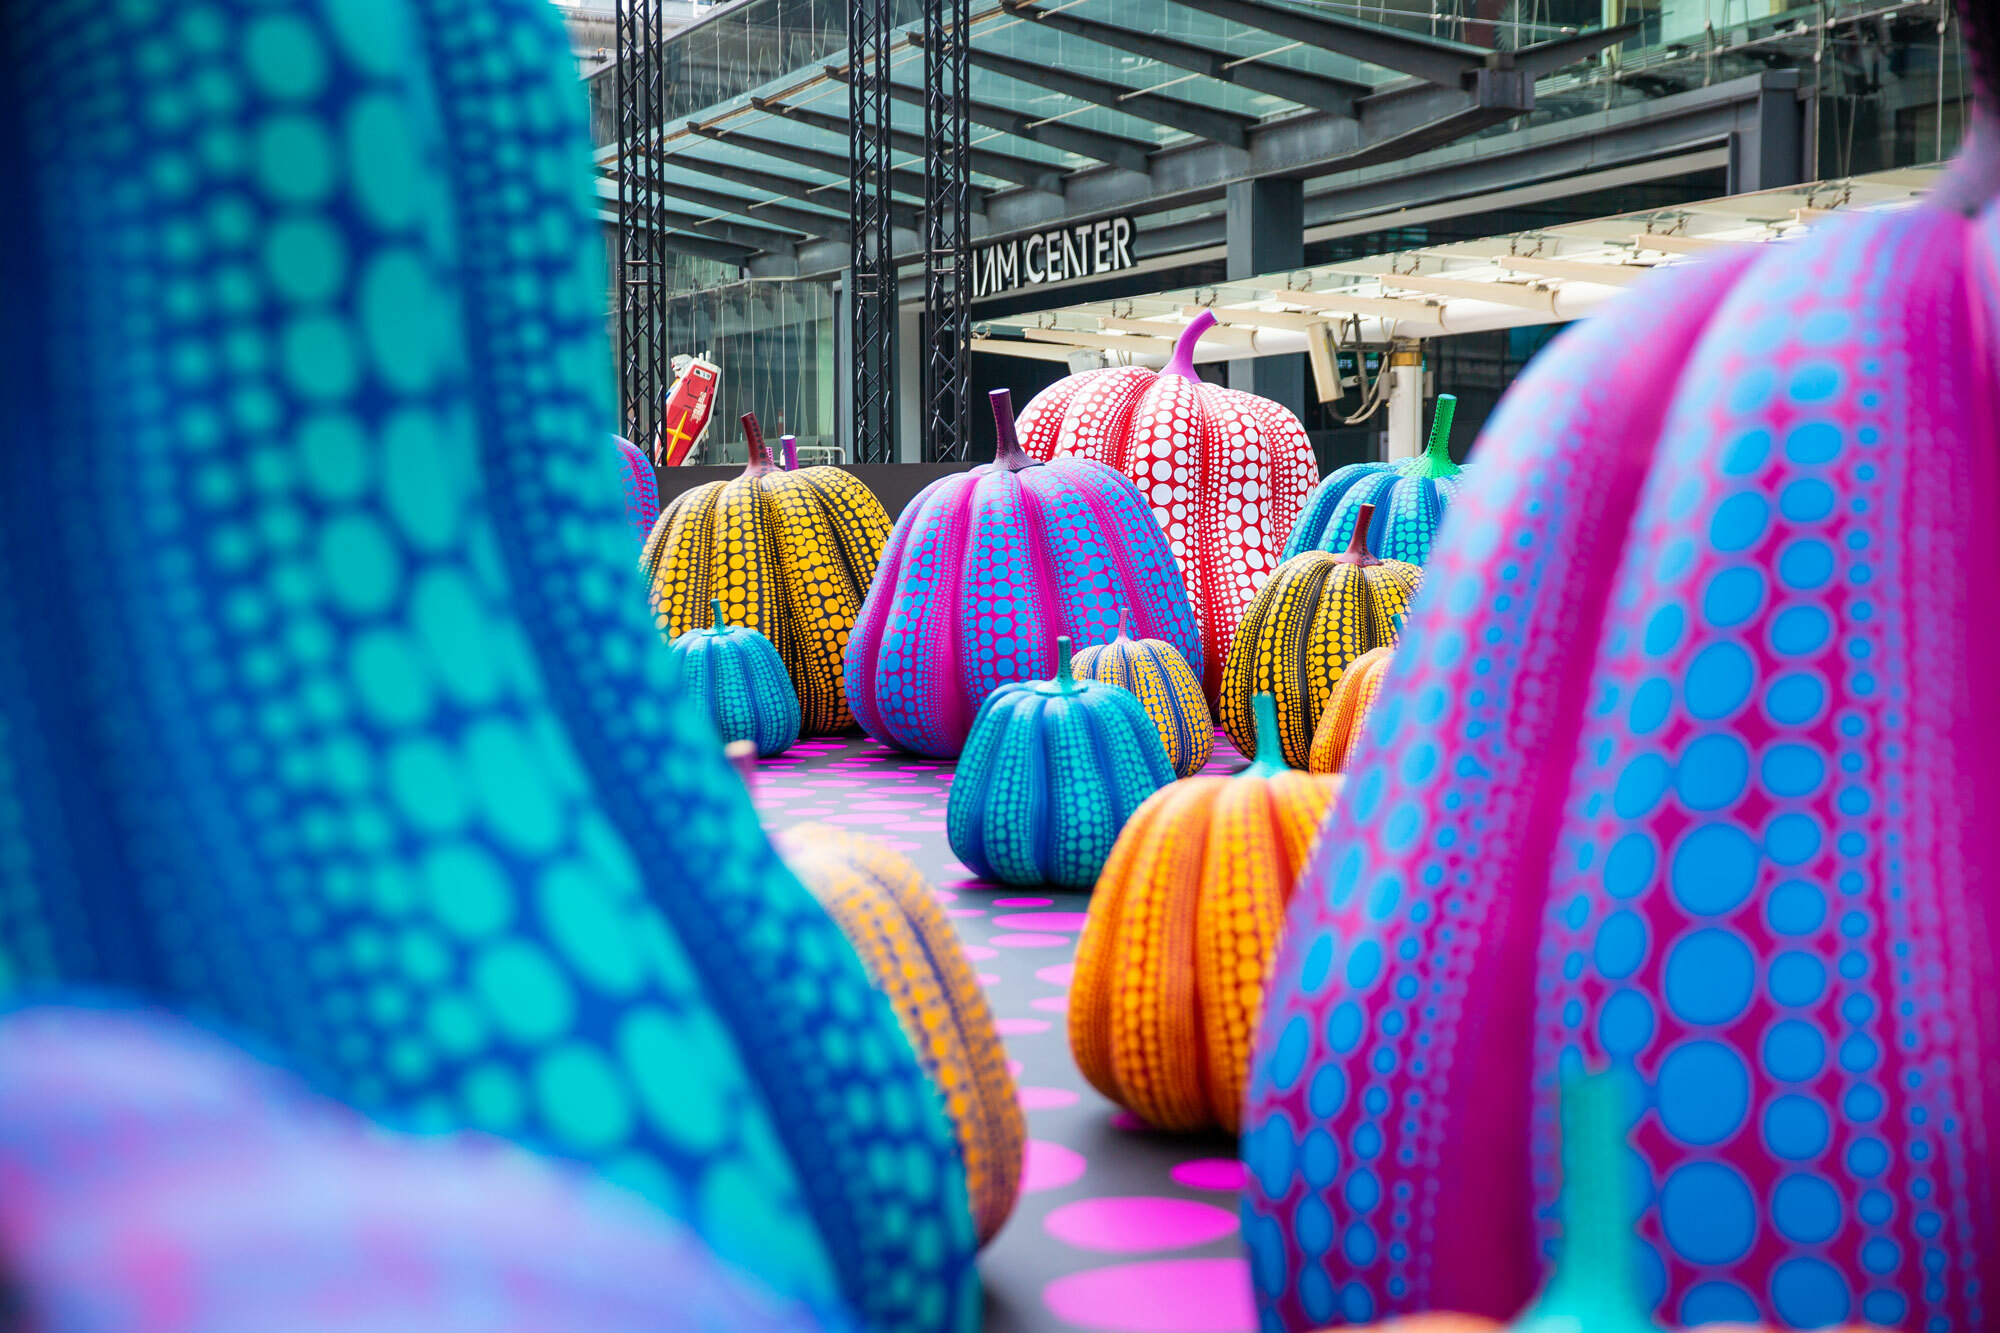 Yayoi Kusama's dotted pumpkins have arrived in Bangkok, thanks to Louis  Vuitton in 2023